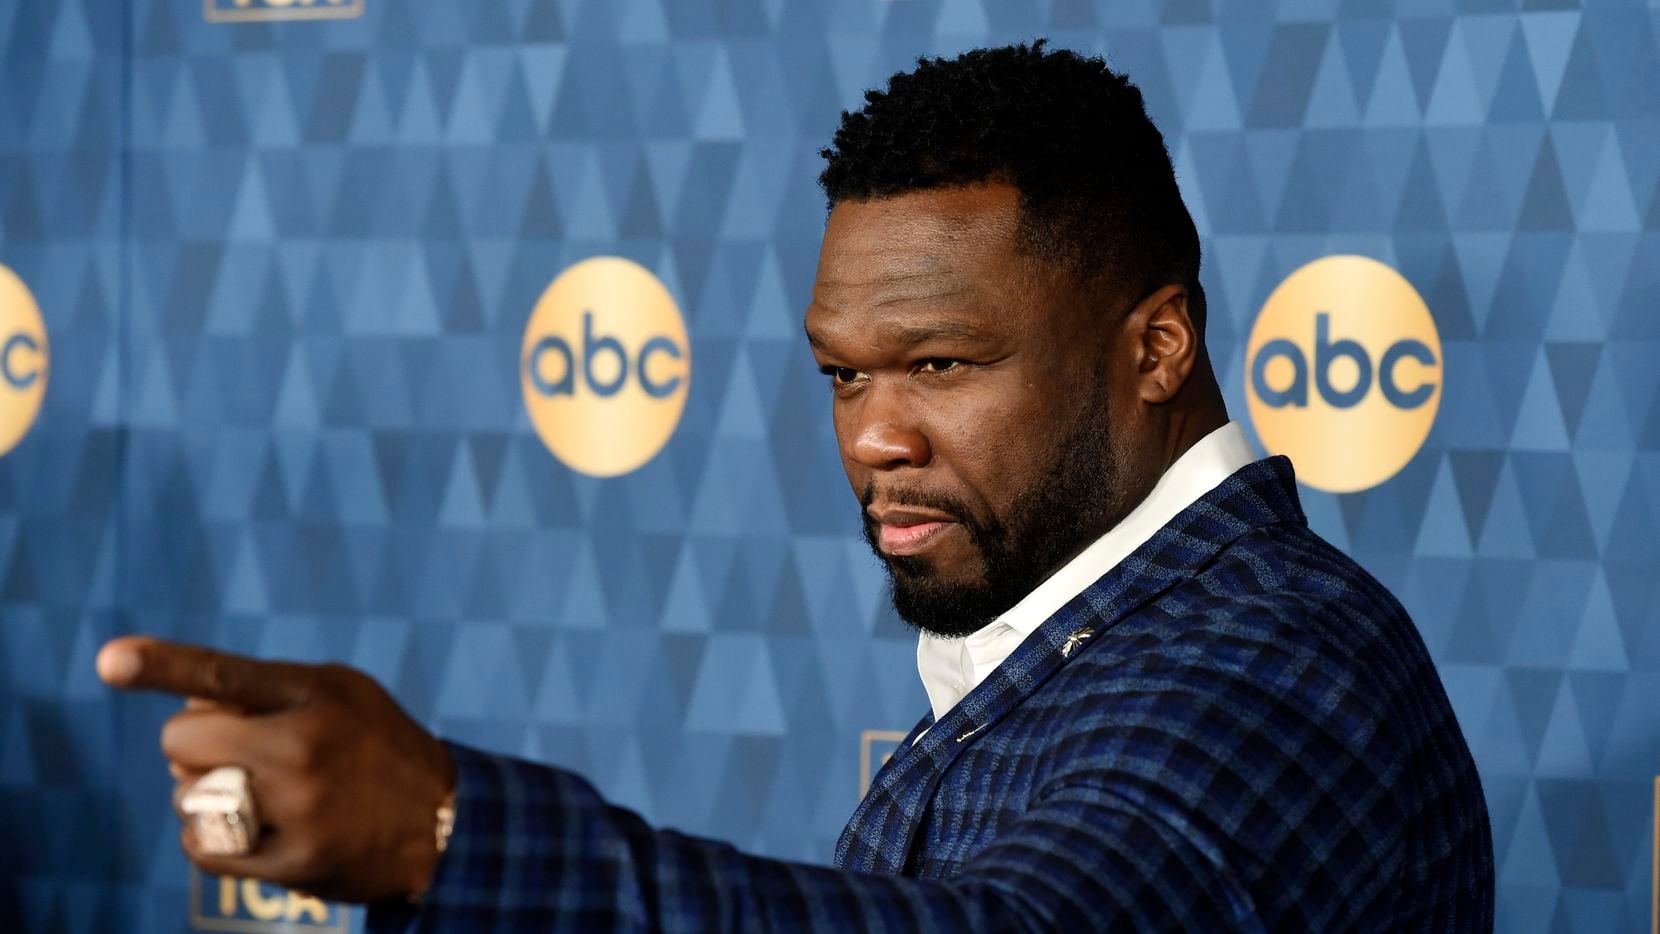 Curtis "50 Cent" Jackson appears in the ABC television series "For Life" and also serves as...